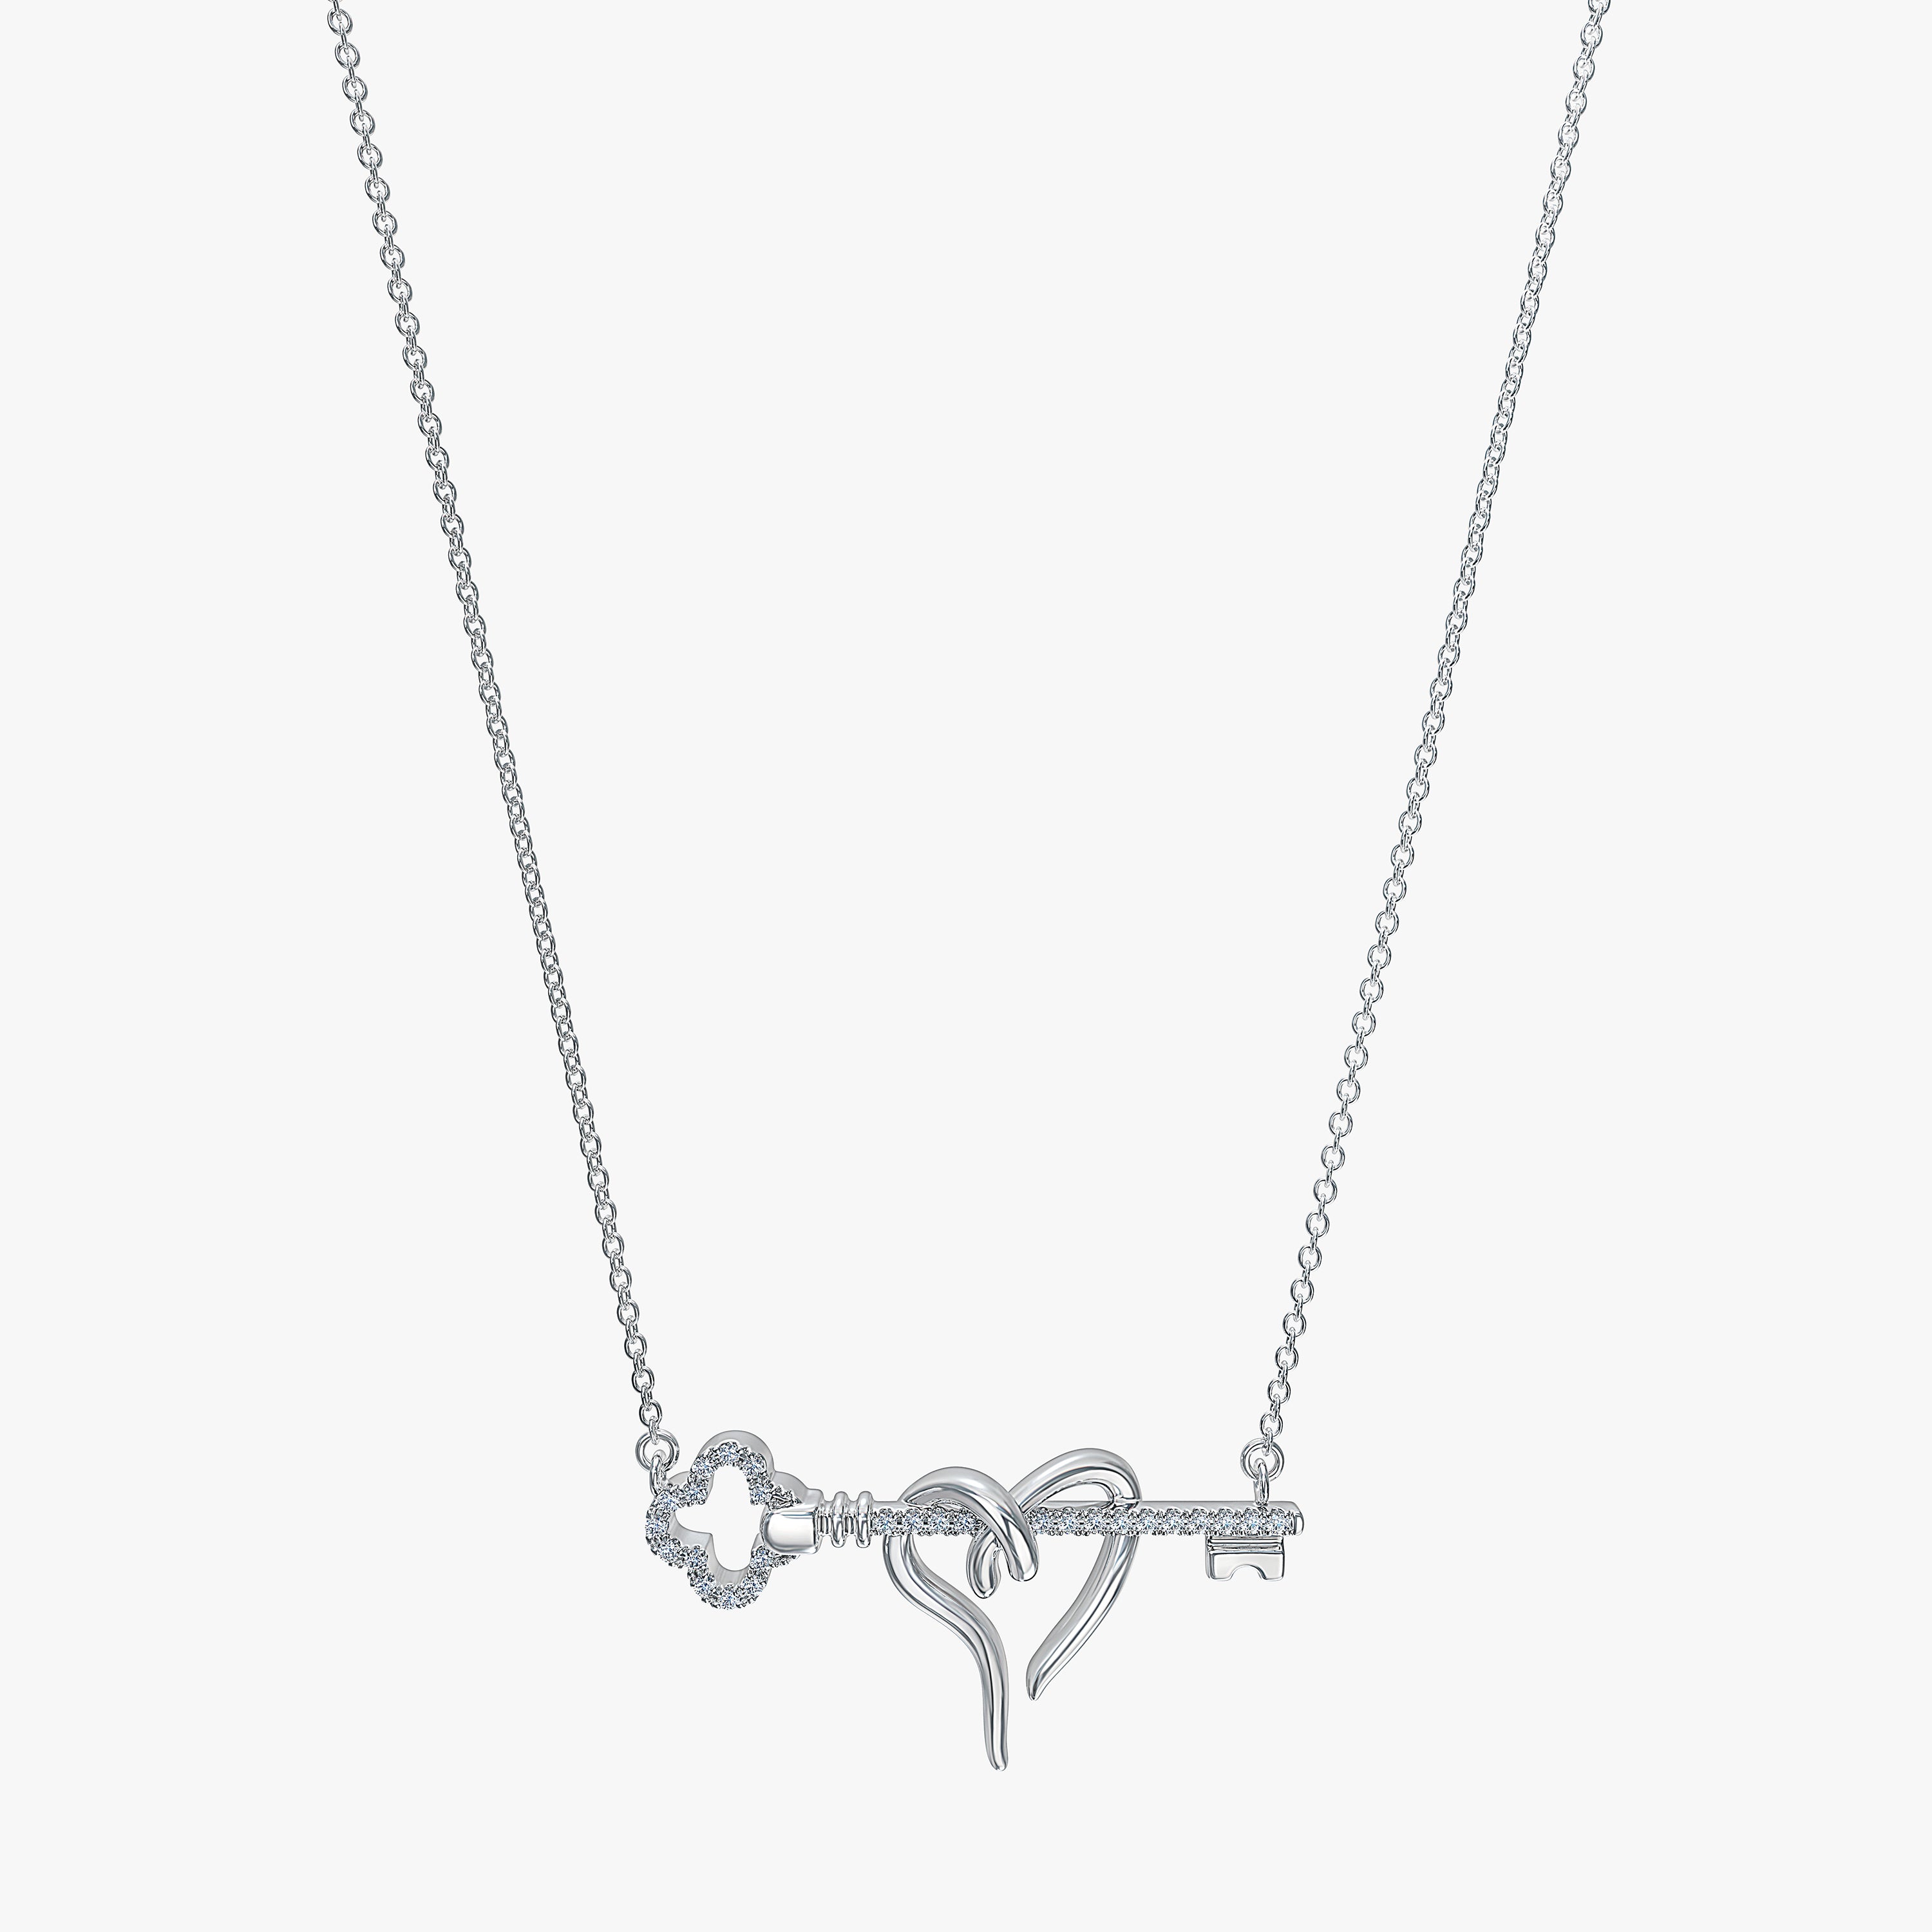 Buy 925 Sterling Silver Plated Four Leaf Clover Necklace by Lovely Heart  Online in India - Etsy